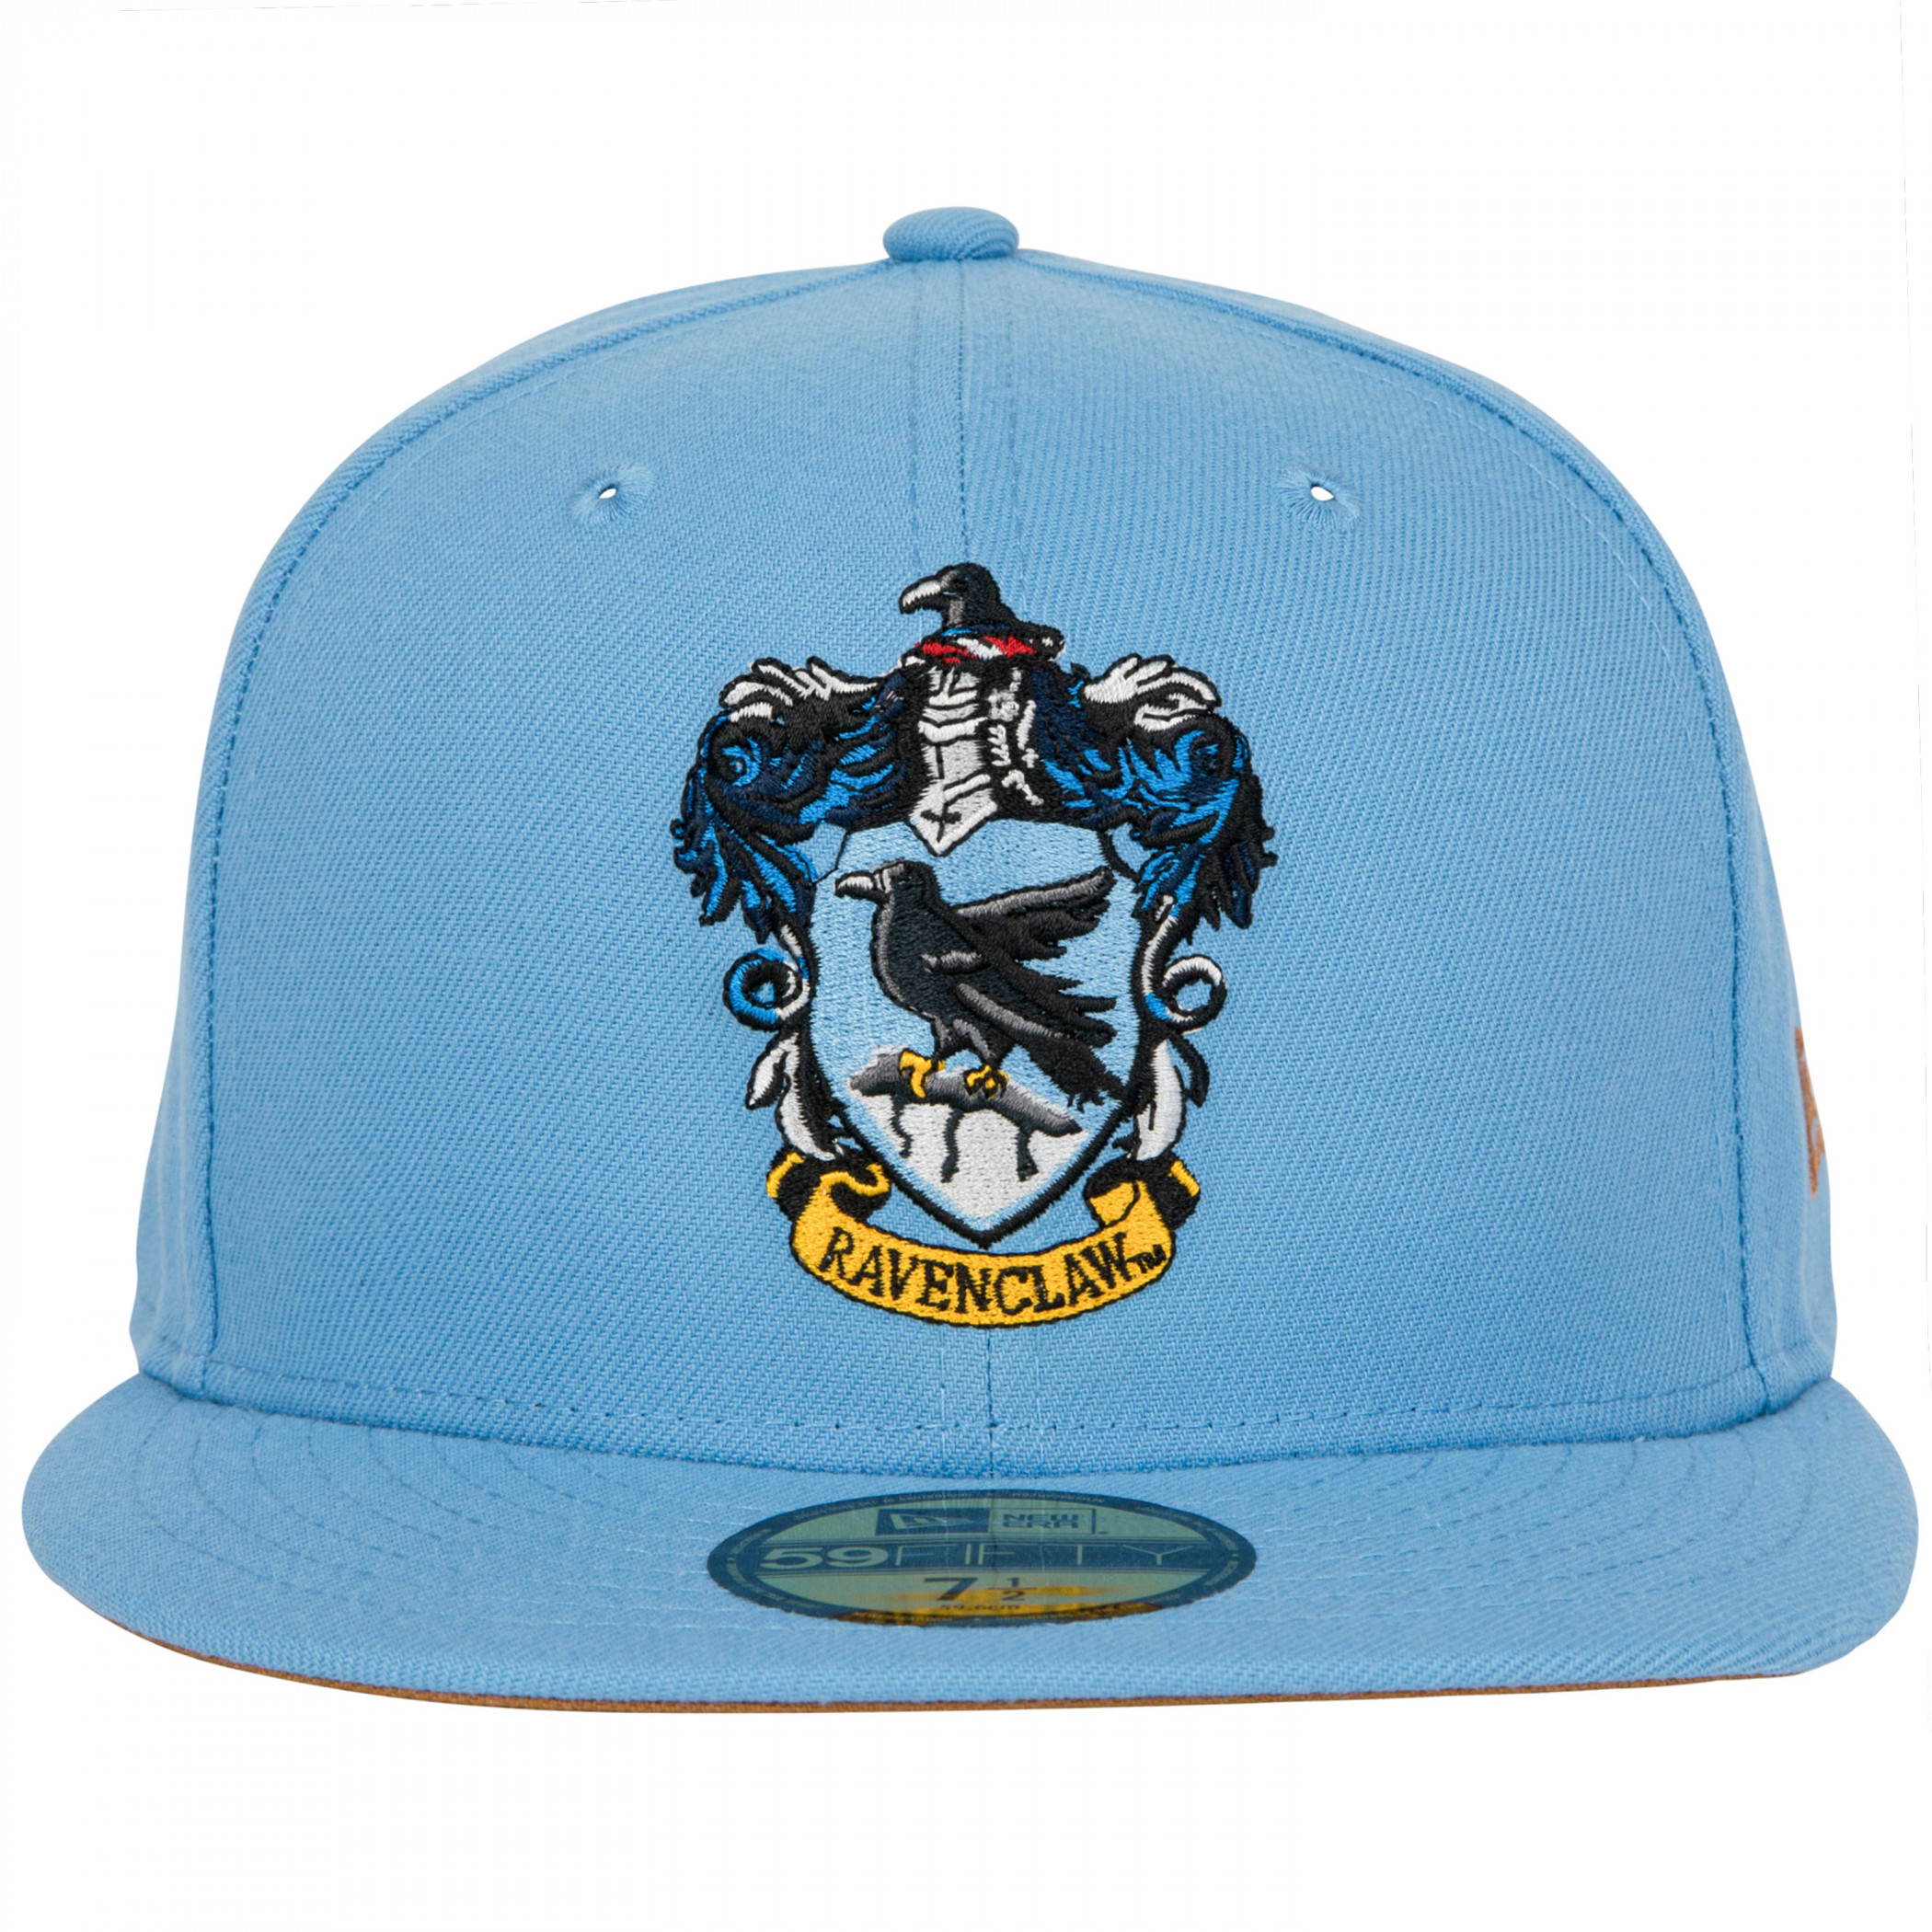 Harry Potter Era Hat New Crest Fitted Ravenclaw House 59Fifty